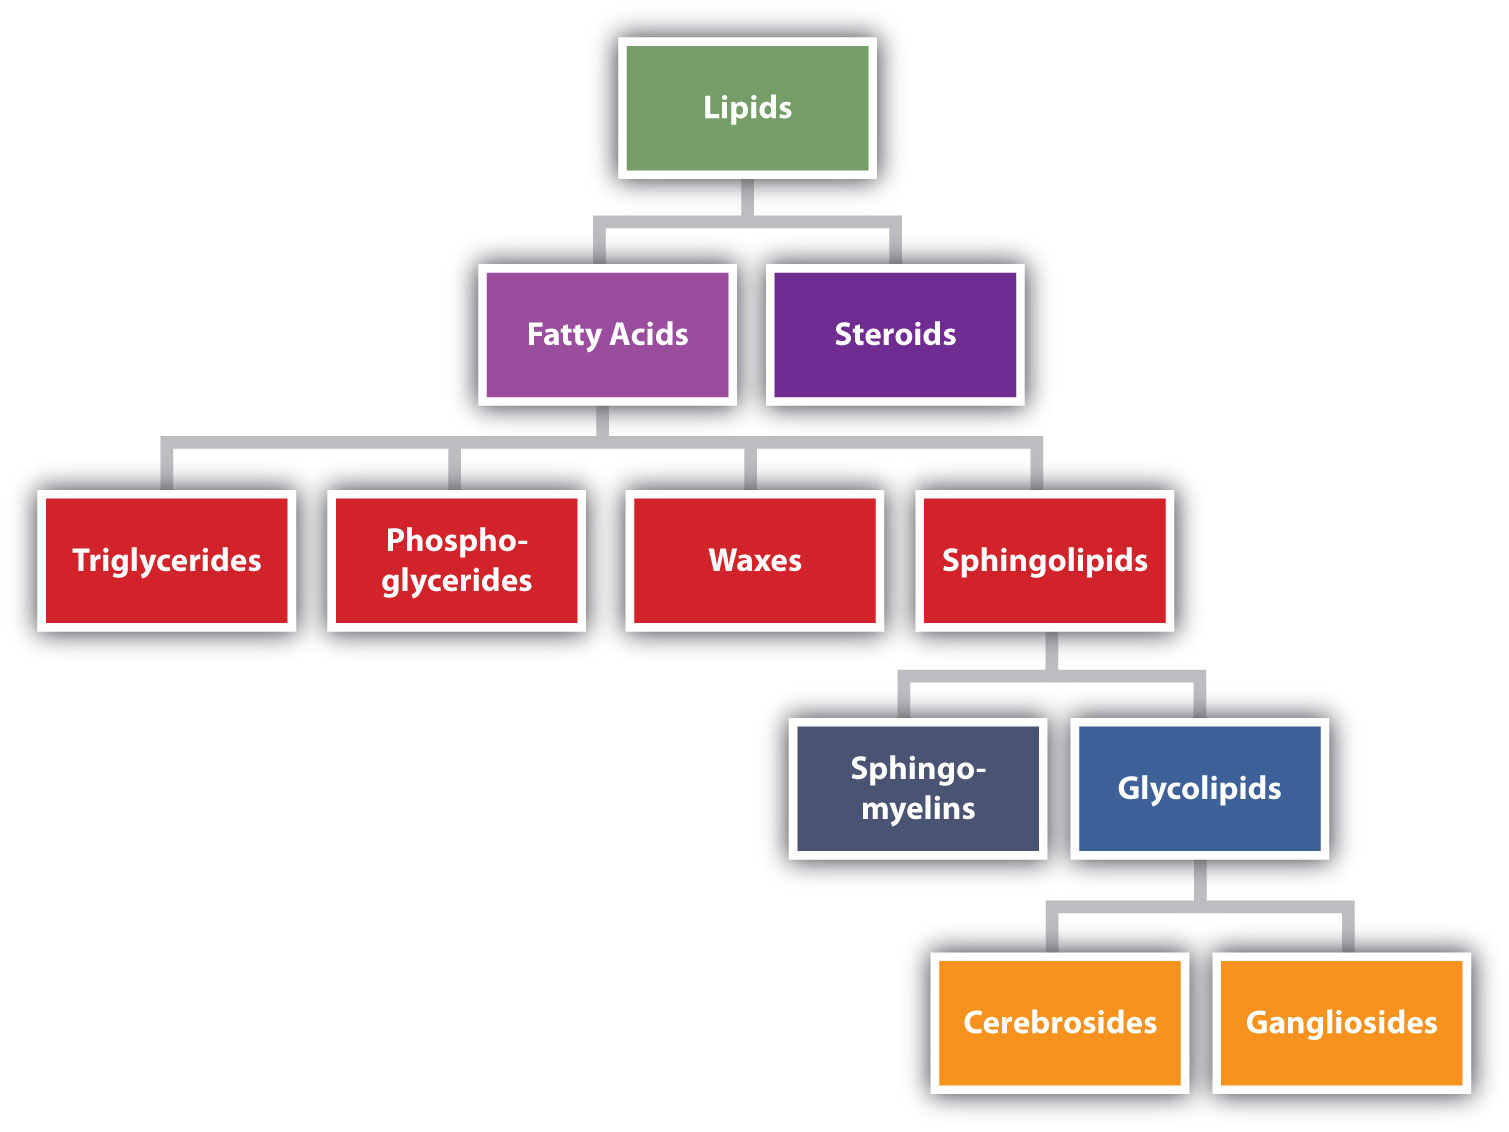 Lipid categorized into fatty acids and steroids. Fatty acids are further separated into triglycerides, phospho-glycerides, waxes, and sphingolipids. Sphingolipids are separated into sphingo-myelins and glycolipids. Glycolipids are separated into cerebrosides and gangliosides.  